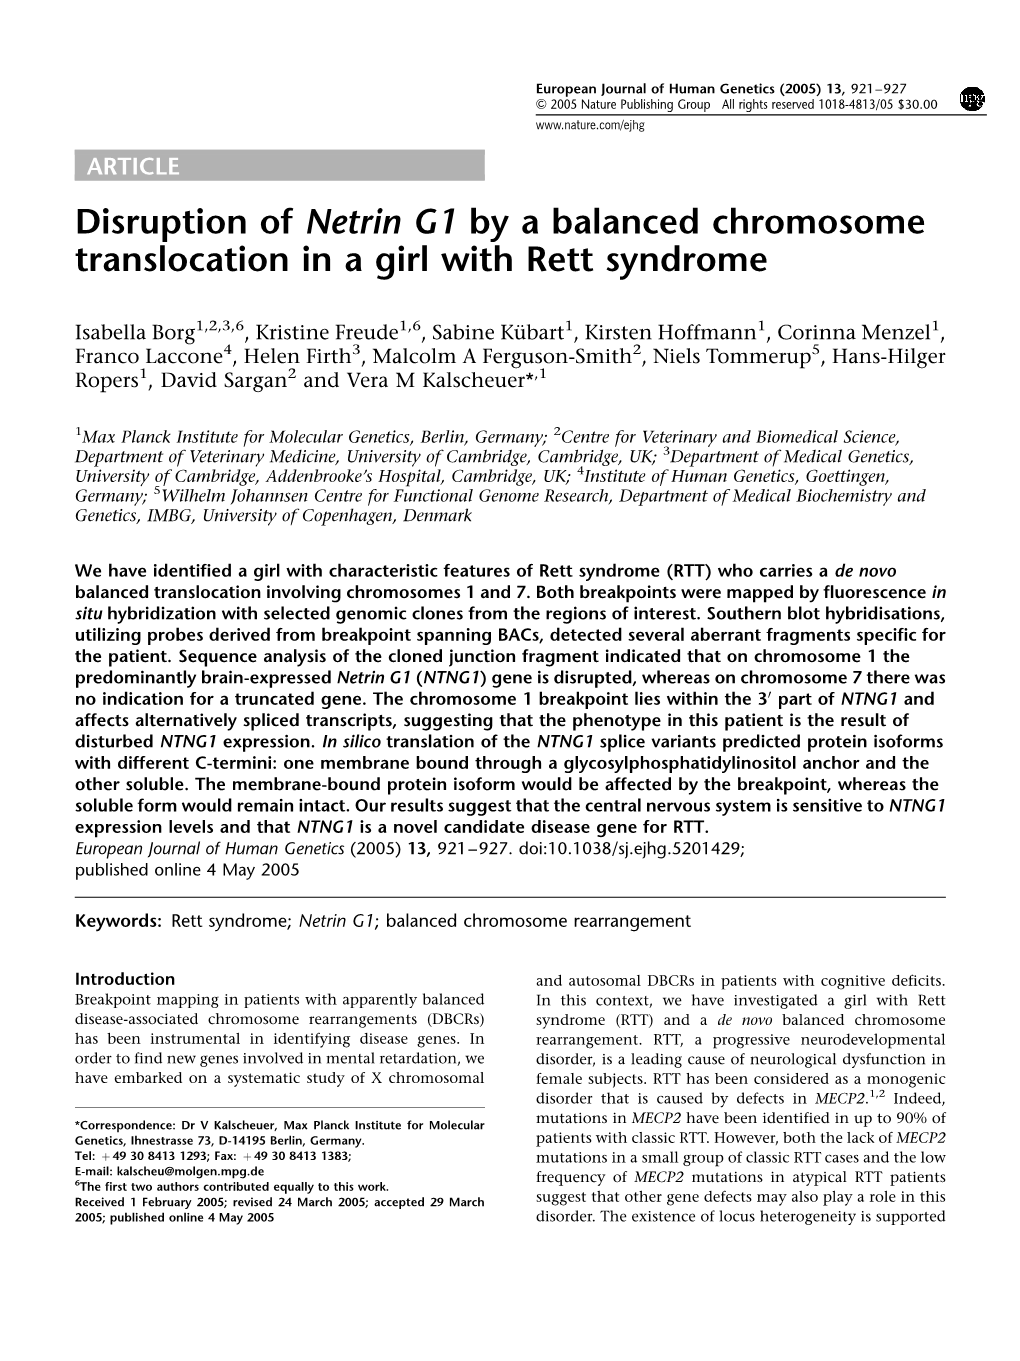 Disruption of Netrin G1 by a Balanced Chromosome Translocation in a Girl with Rett Syndrome